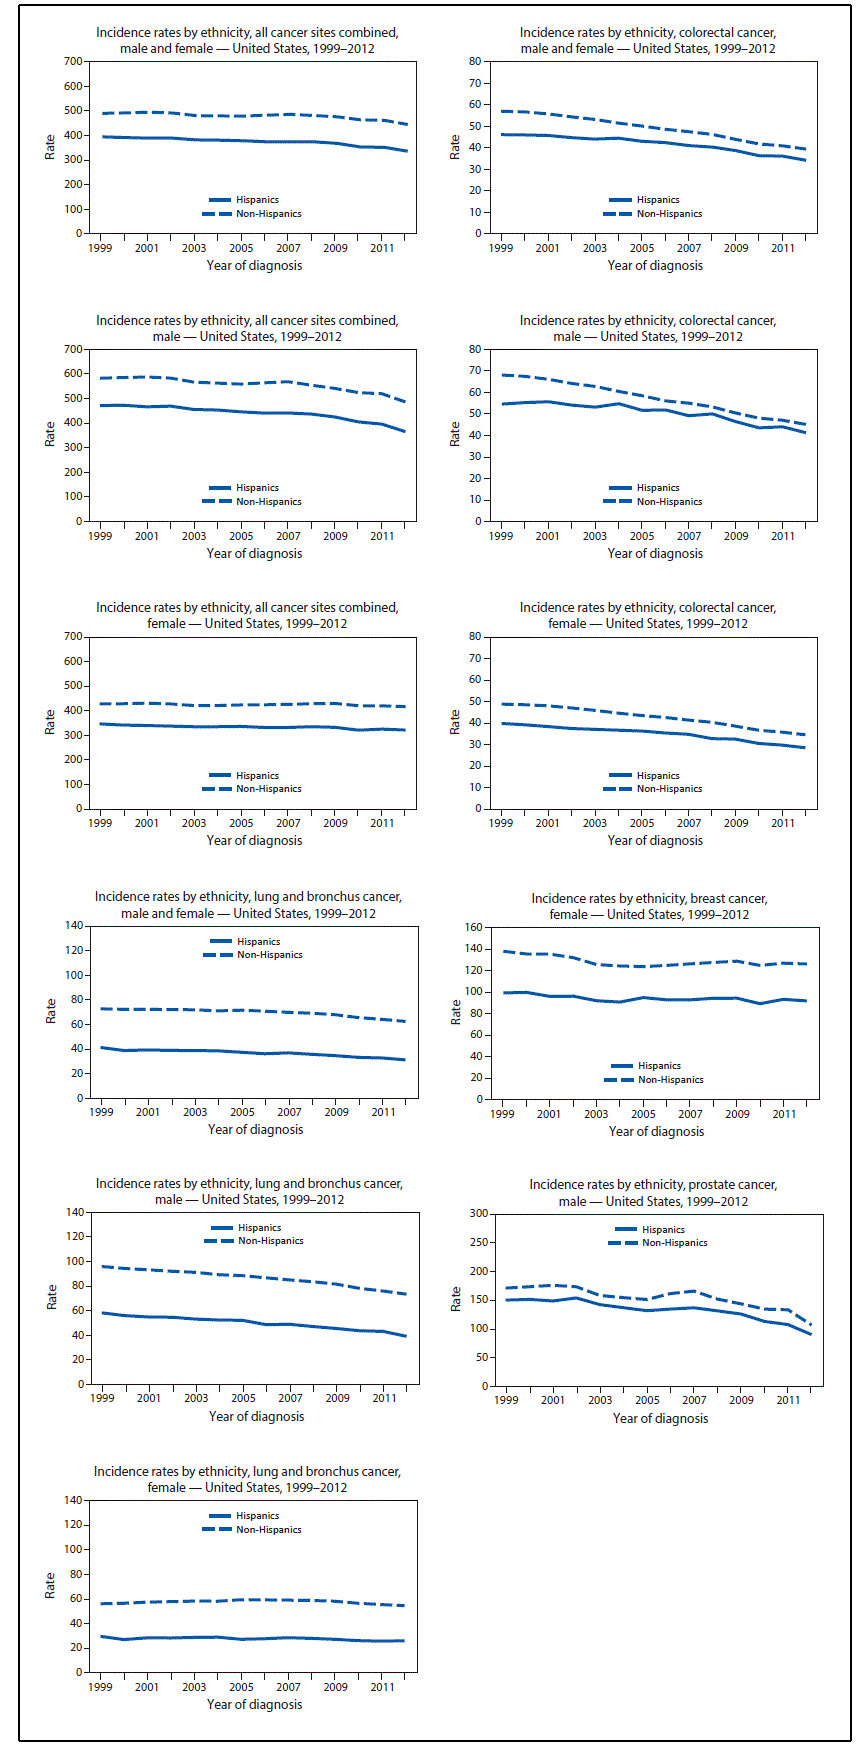 This figure presents 11 line charts showing, by ethnicity (Hispanic and non-Hispanic) and sex, the age-adjusted rate per 100,000 population of invasive cancer cases in the United States during 1999â€“2012. Rates are shown for males and females combined and separately for each sex for all cancer sites combined, colorectal cancer, and lung and bronchus cancer, and by ethnicity for male prostate cancer and female breast cancer.